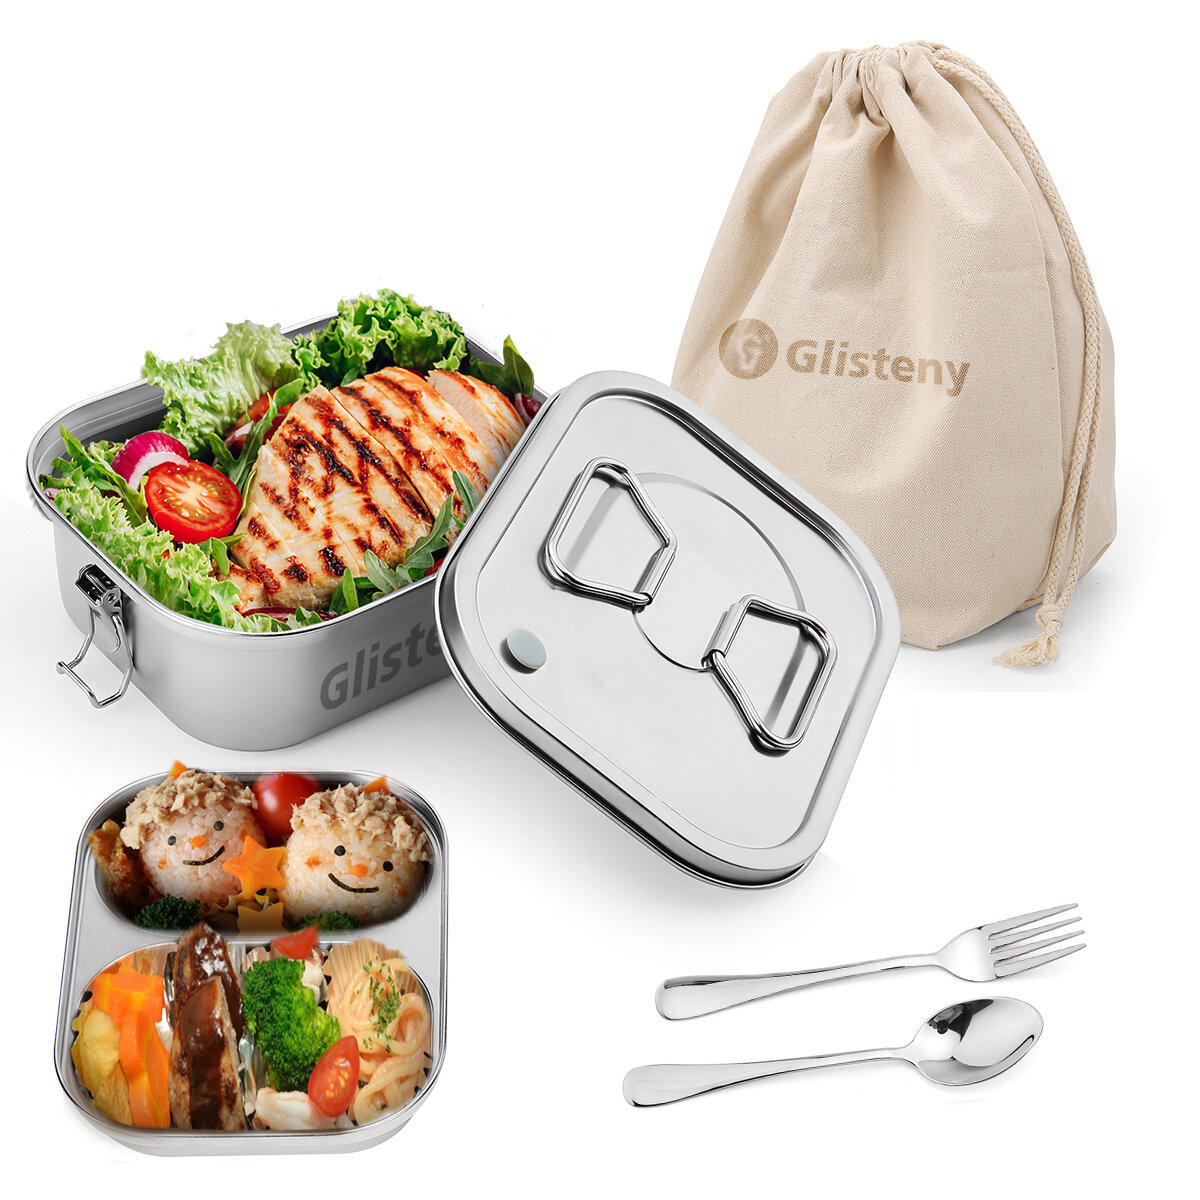 Glisteny Stainless Steel Lunch Box Children with Compartments 1600ml Lunch Box Leak-Proof for Childr